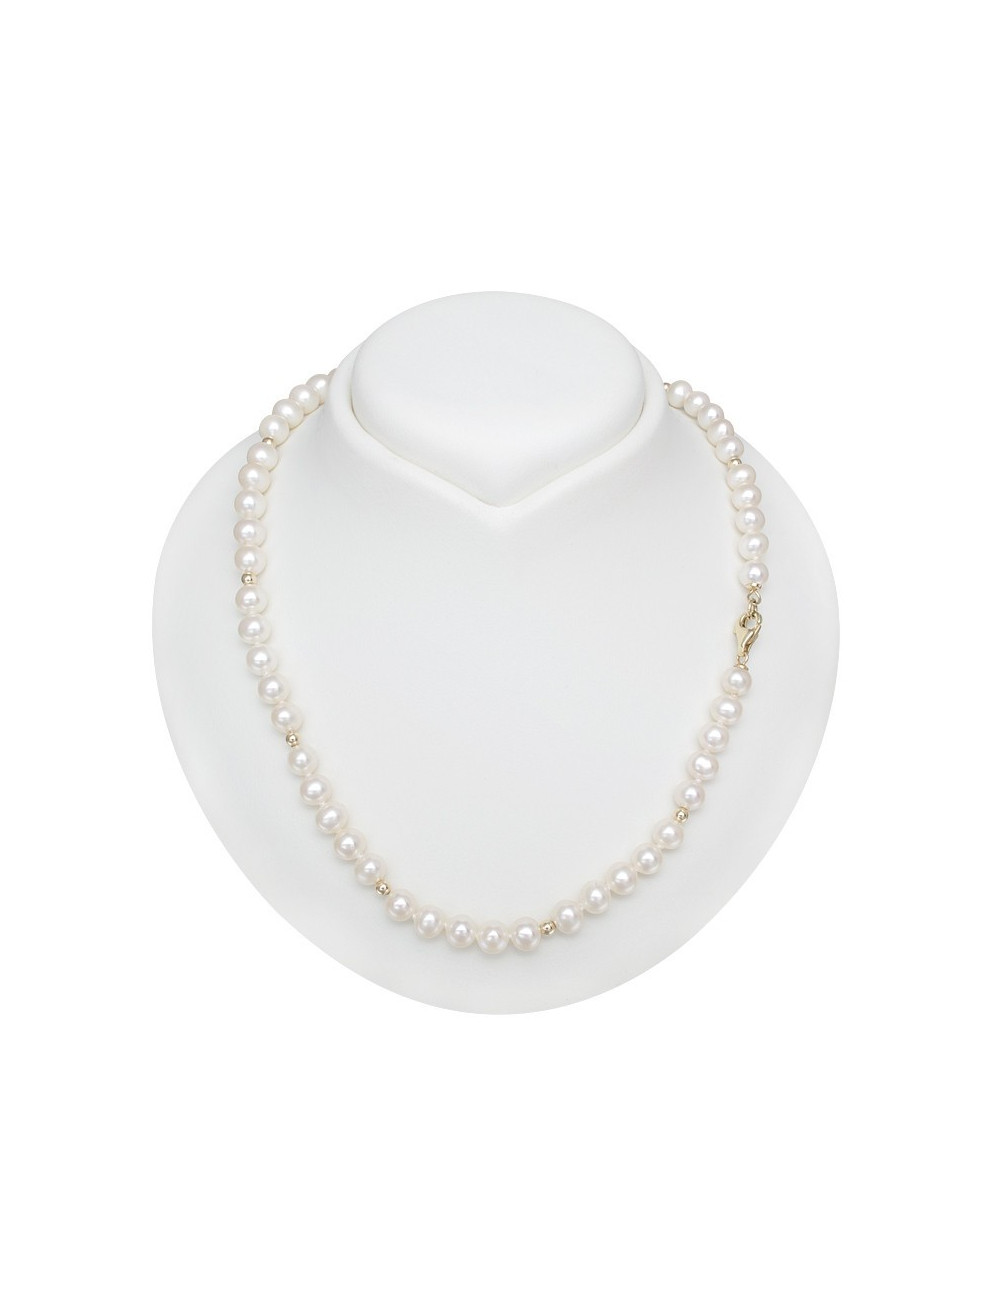 Necklace of small white pearls with gold elements N67+kuG1